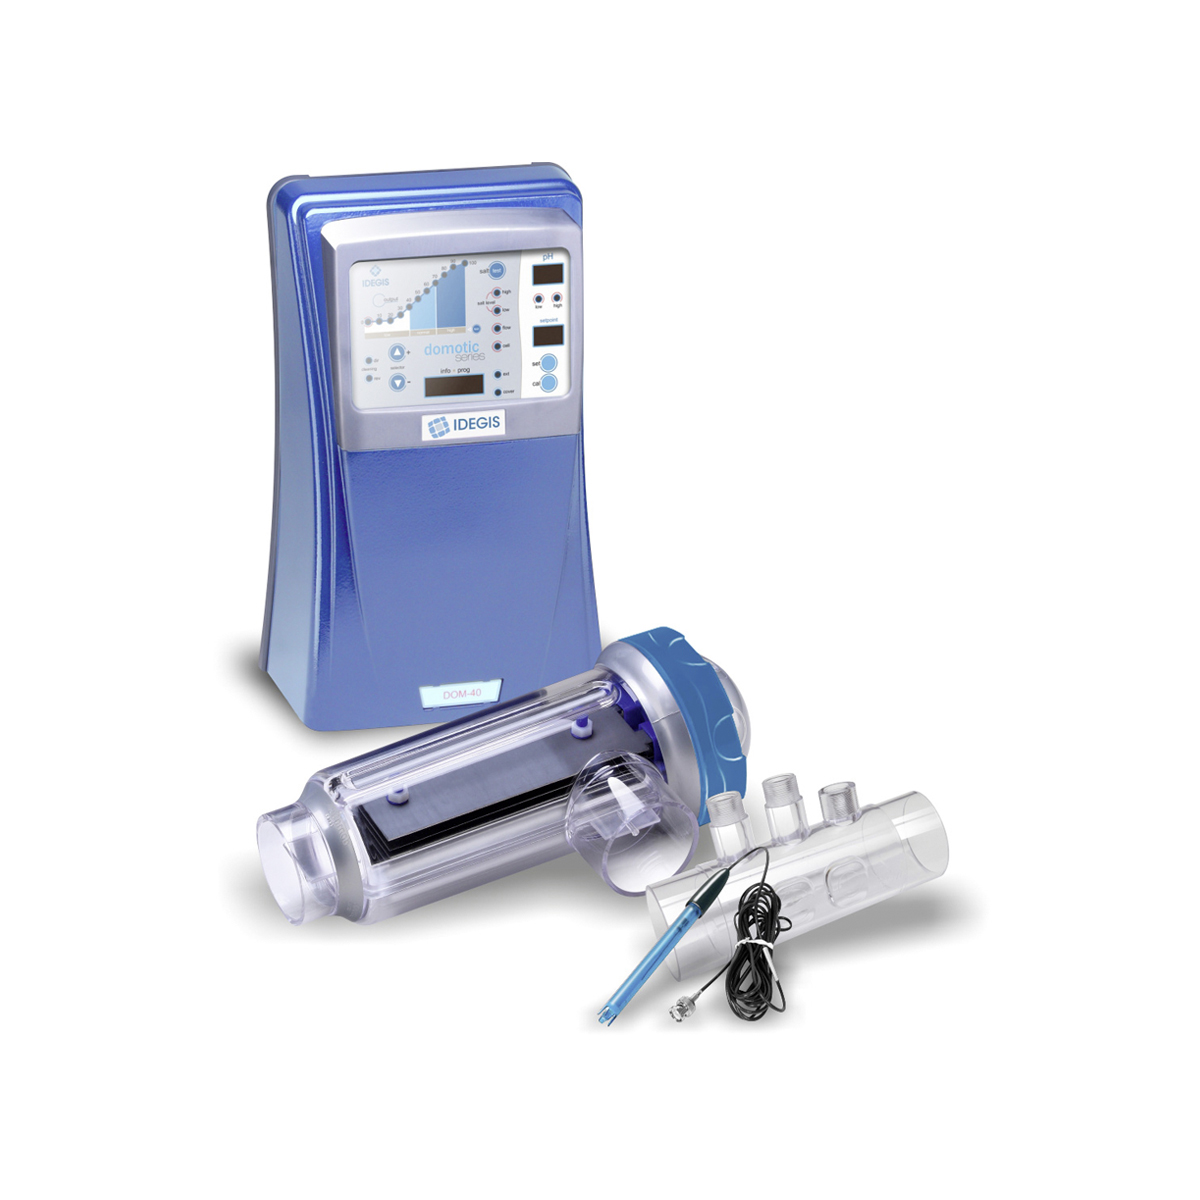 Salt electrolysis unit DOMOTIC-PH 12G self cleaning with integrated PH-control 12 g chlorine/hour for private pools up to 50 m3 Salt electrolysis unit DOMOTIC-PH 12G self cleaning with integrated PH-control 12 g chlorine/hour for private pools up to 50 m3